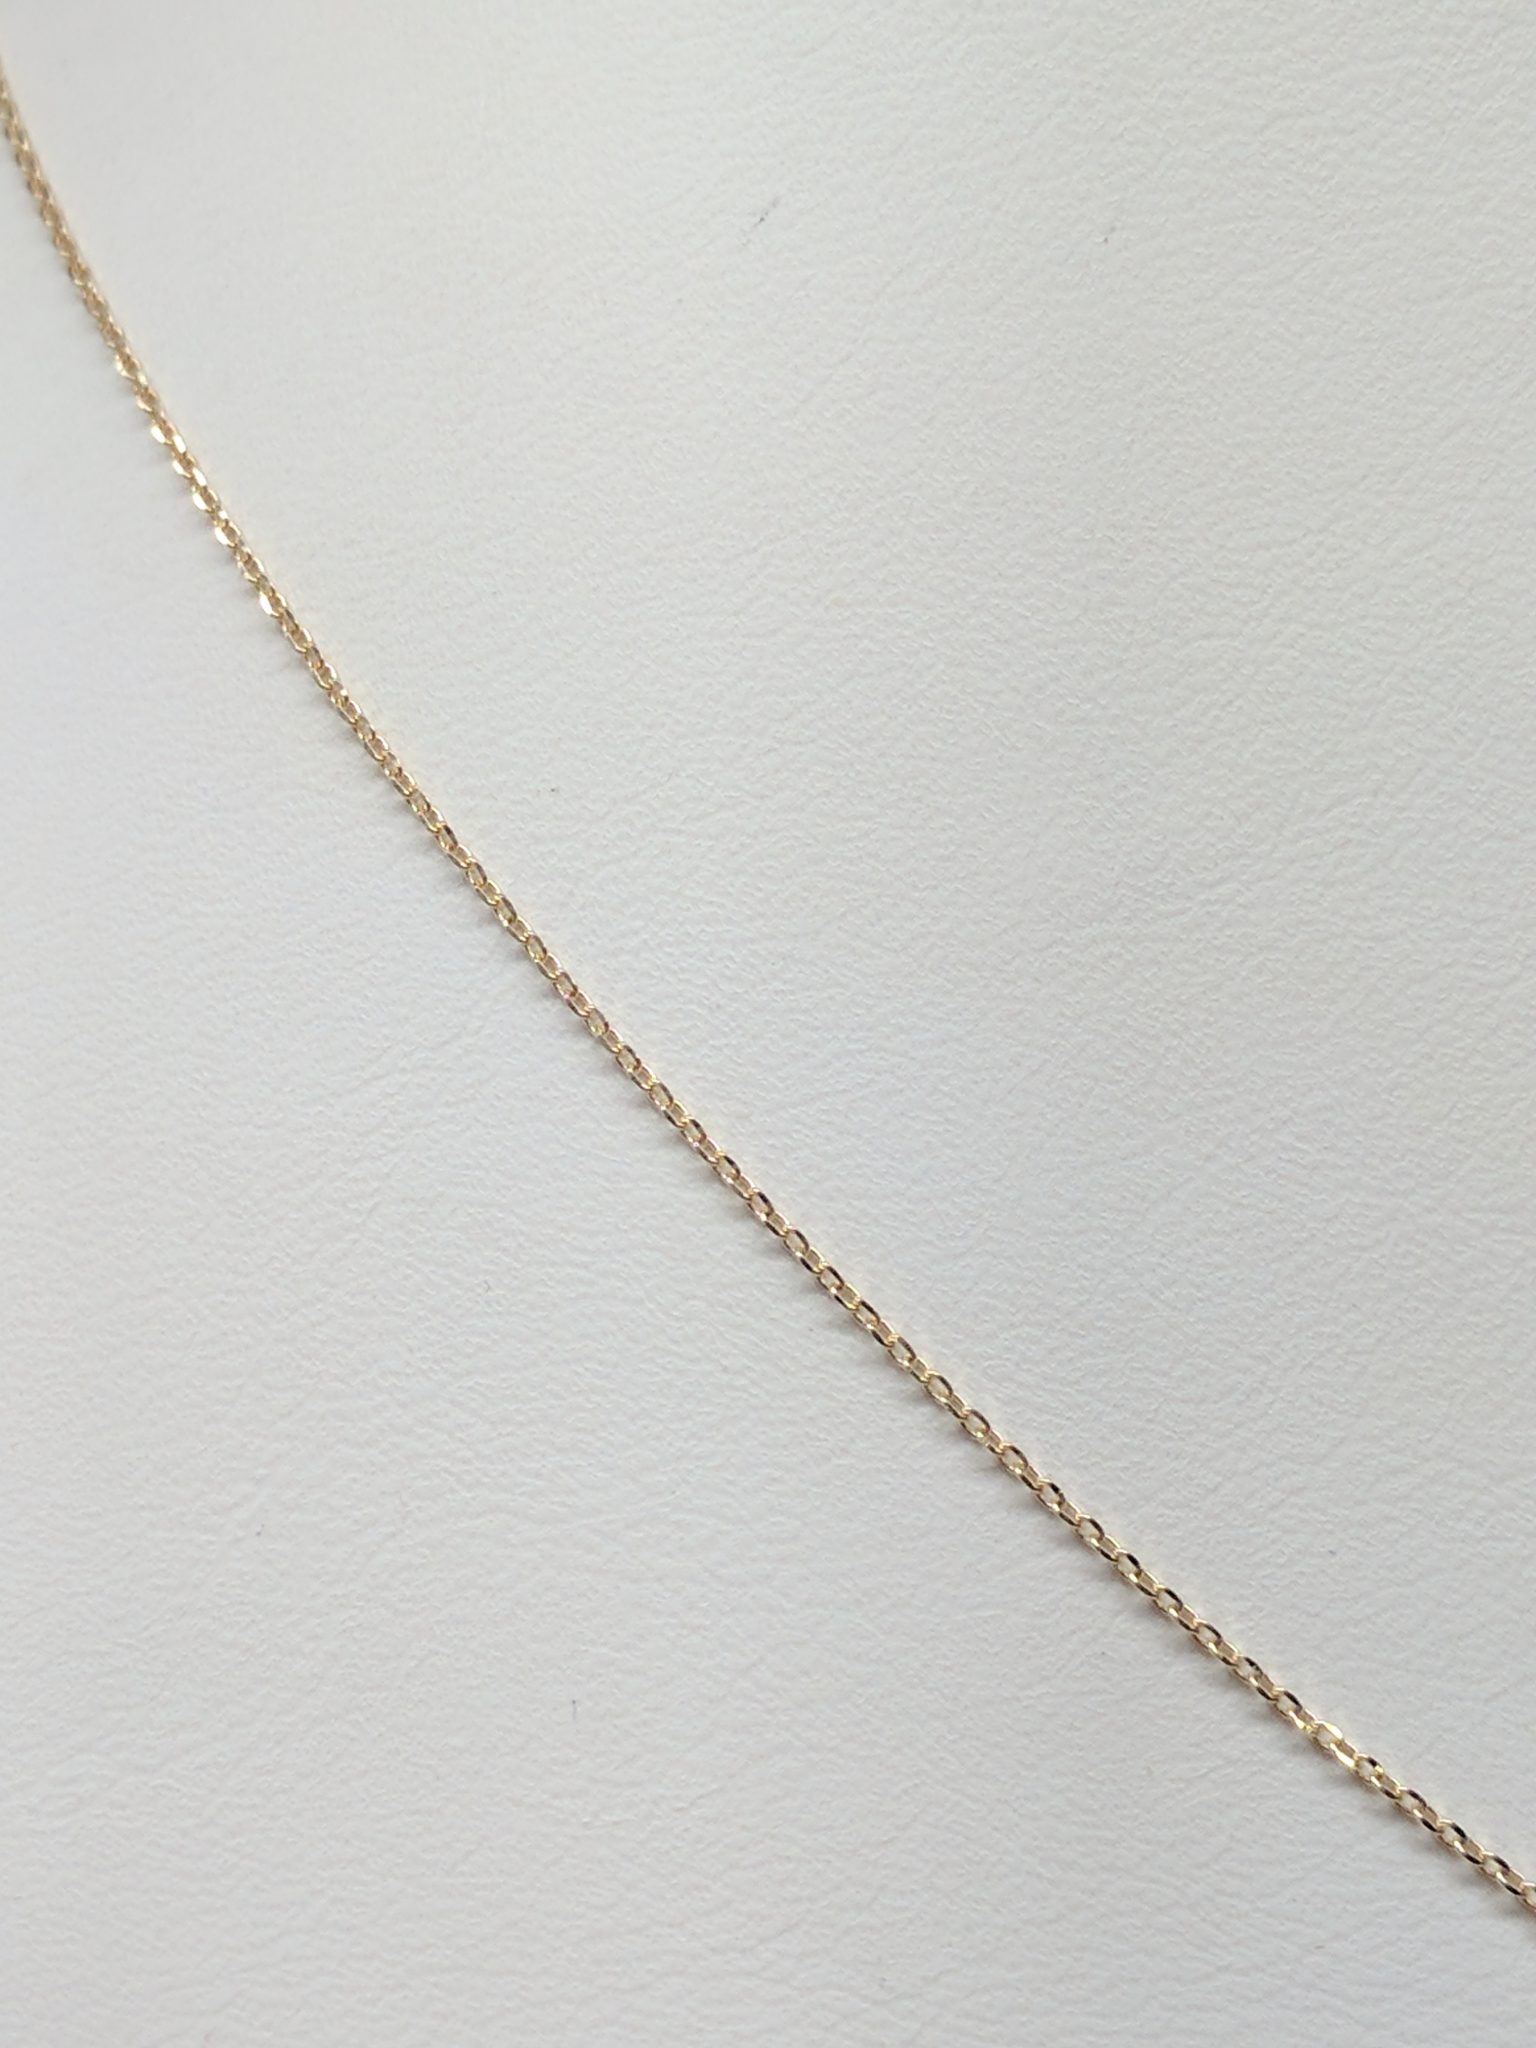 CHAIN, GOLD CHAIN, LADIES CHAIN, PENDANT SET, 14KT, 14KT YELLOW GOLD